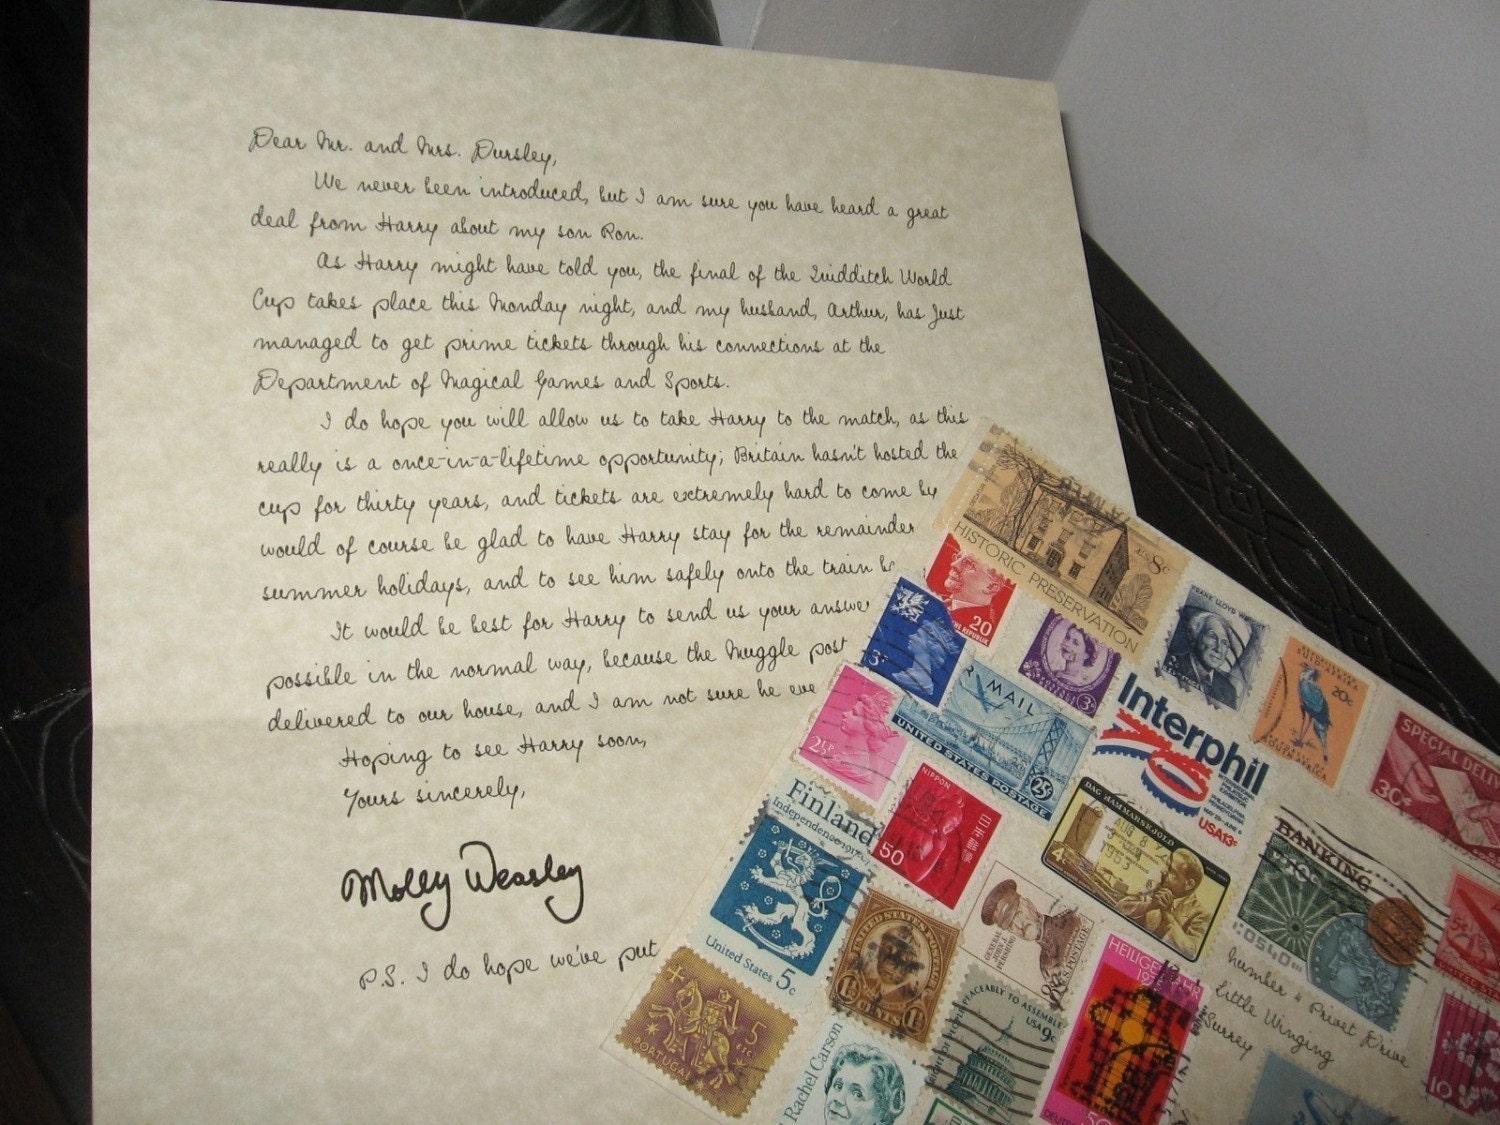 Quidditch World Cup Invitation from Molly Weasley to Harry Potter, Goblet of Fire